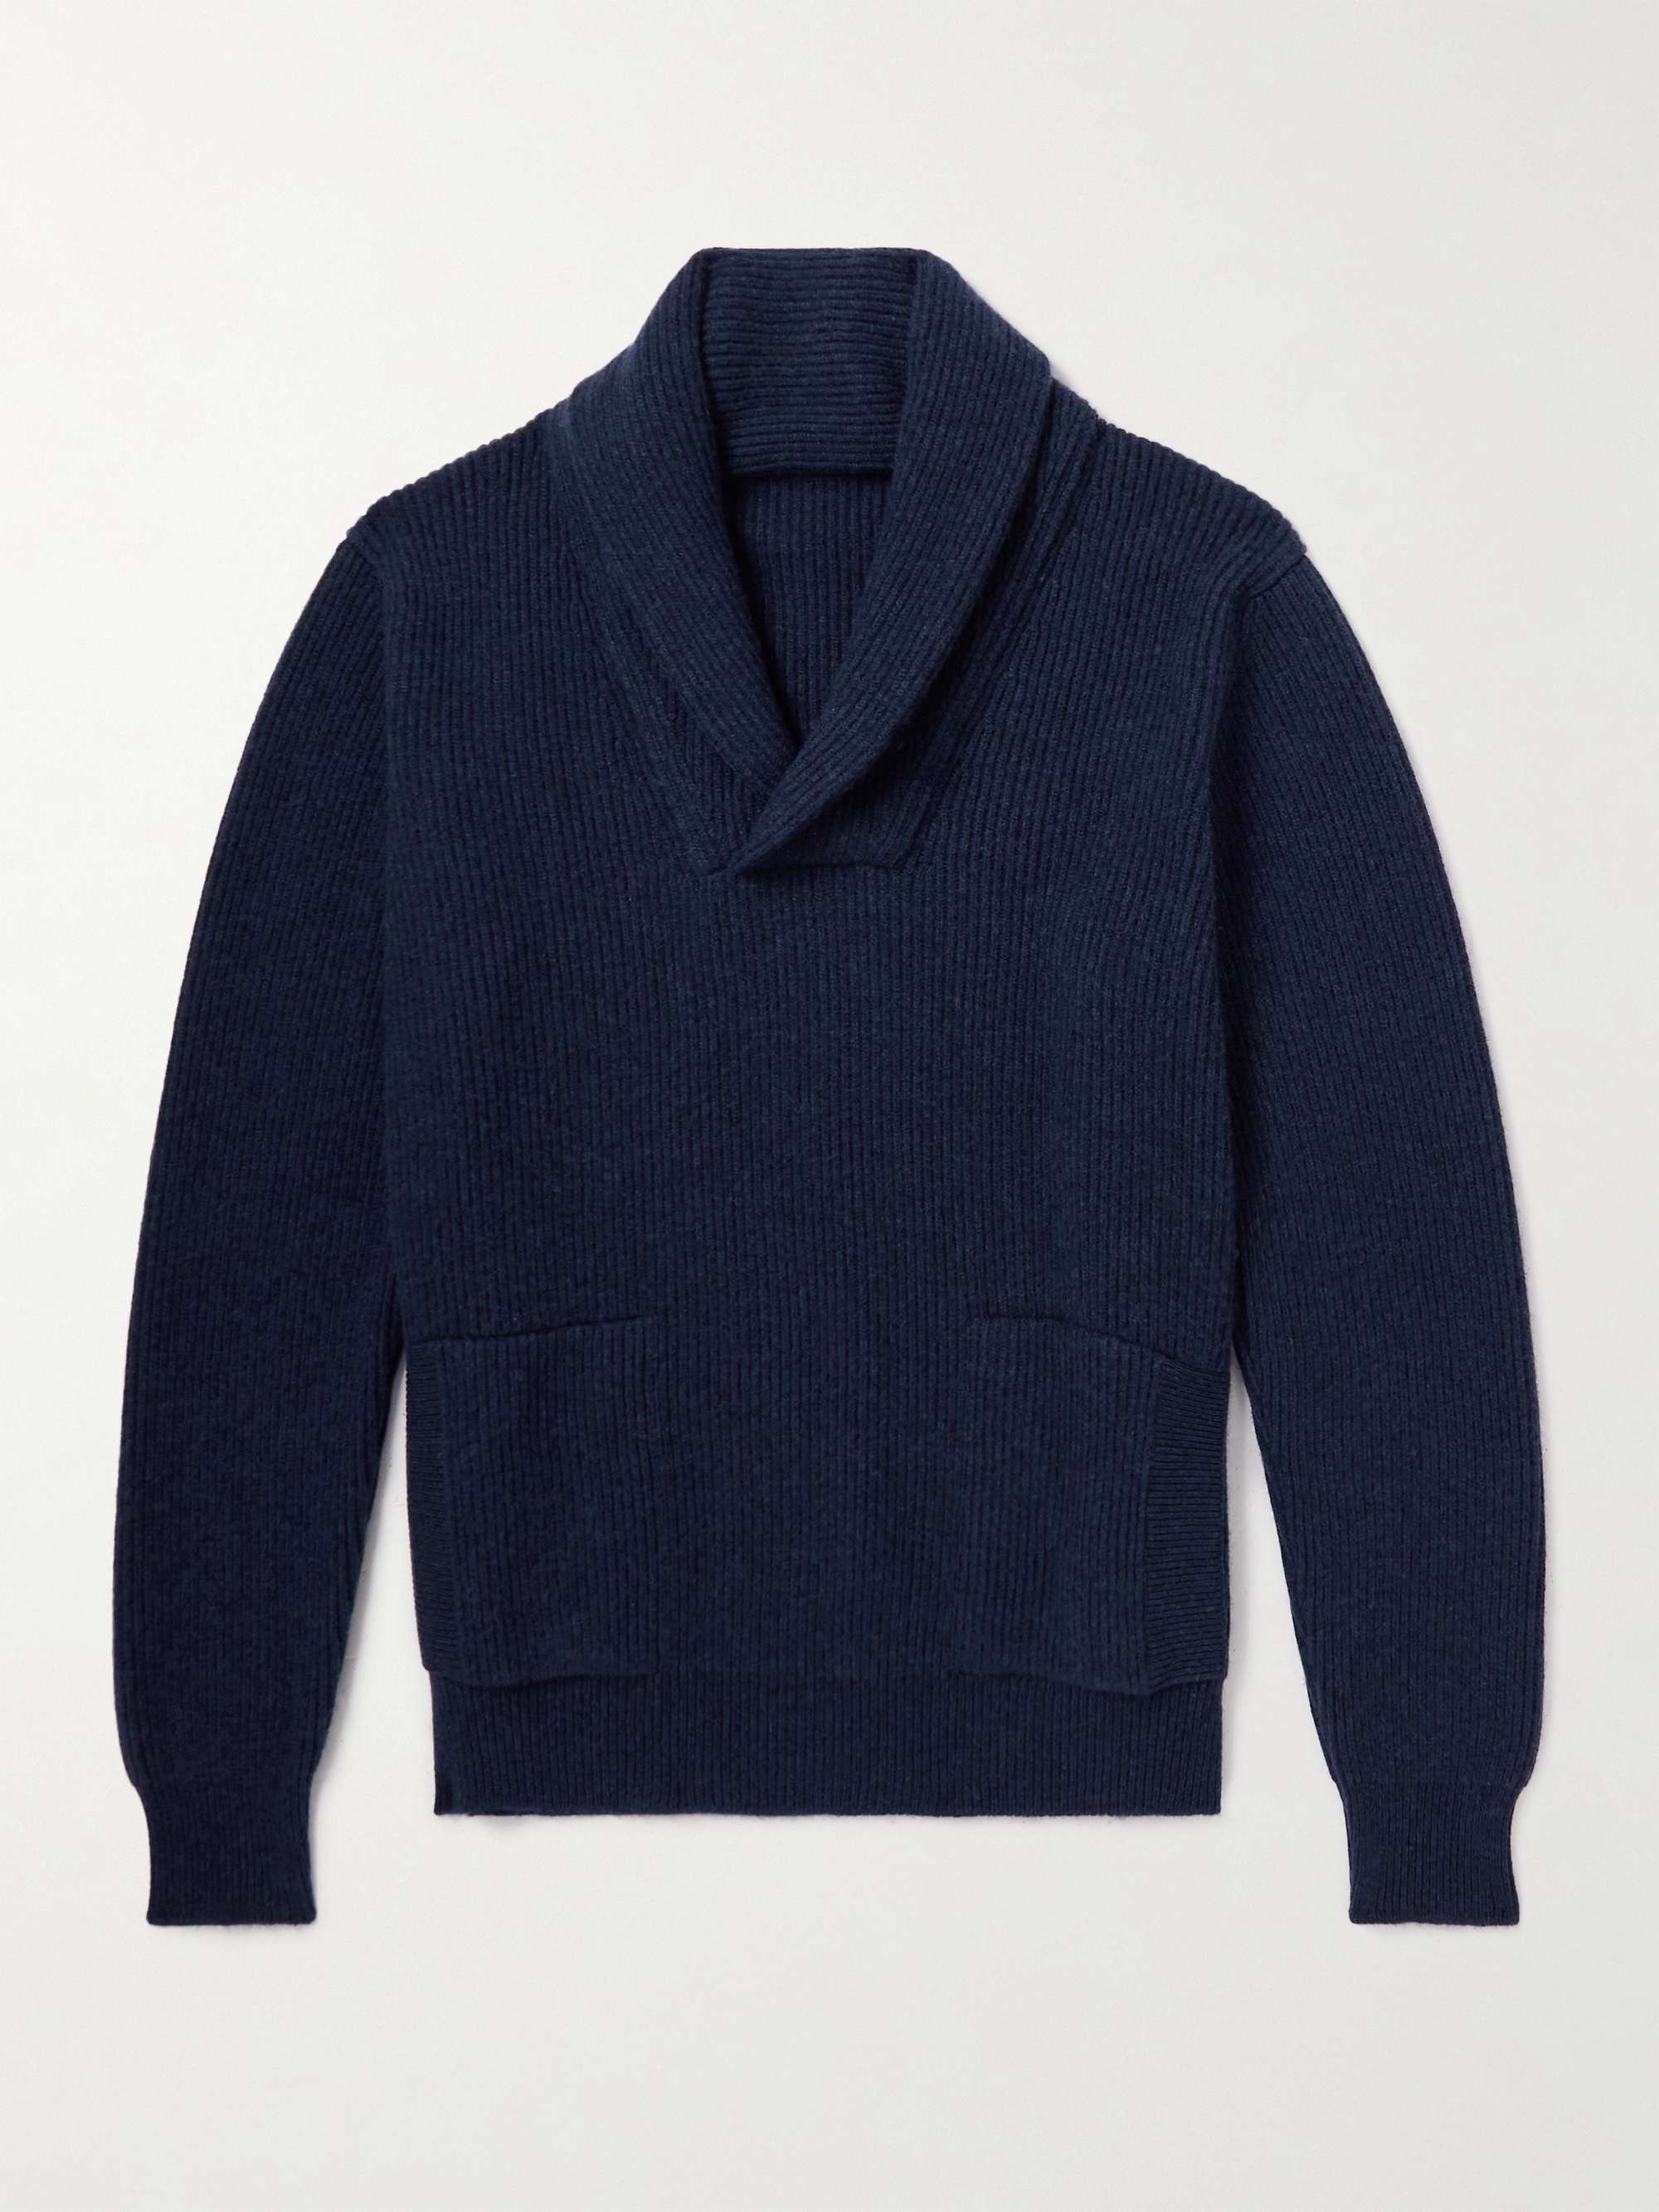 ANDERSON & SHEPPARD Shawl-Collar Ribbed Cashmere Sweater